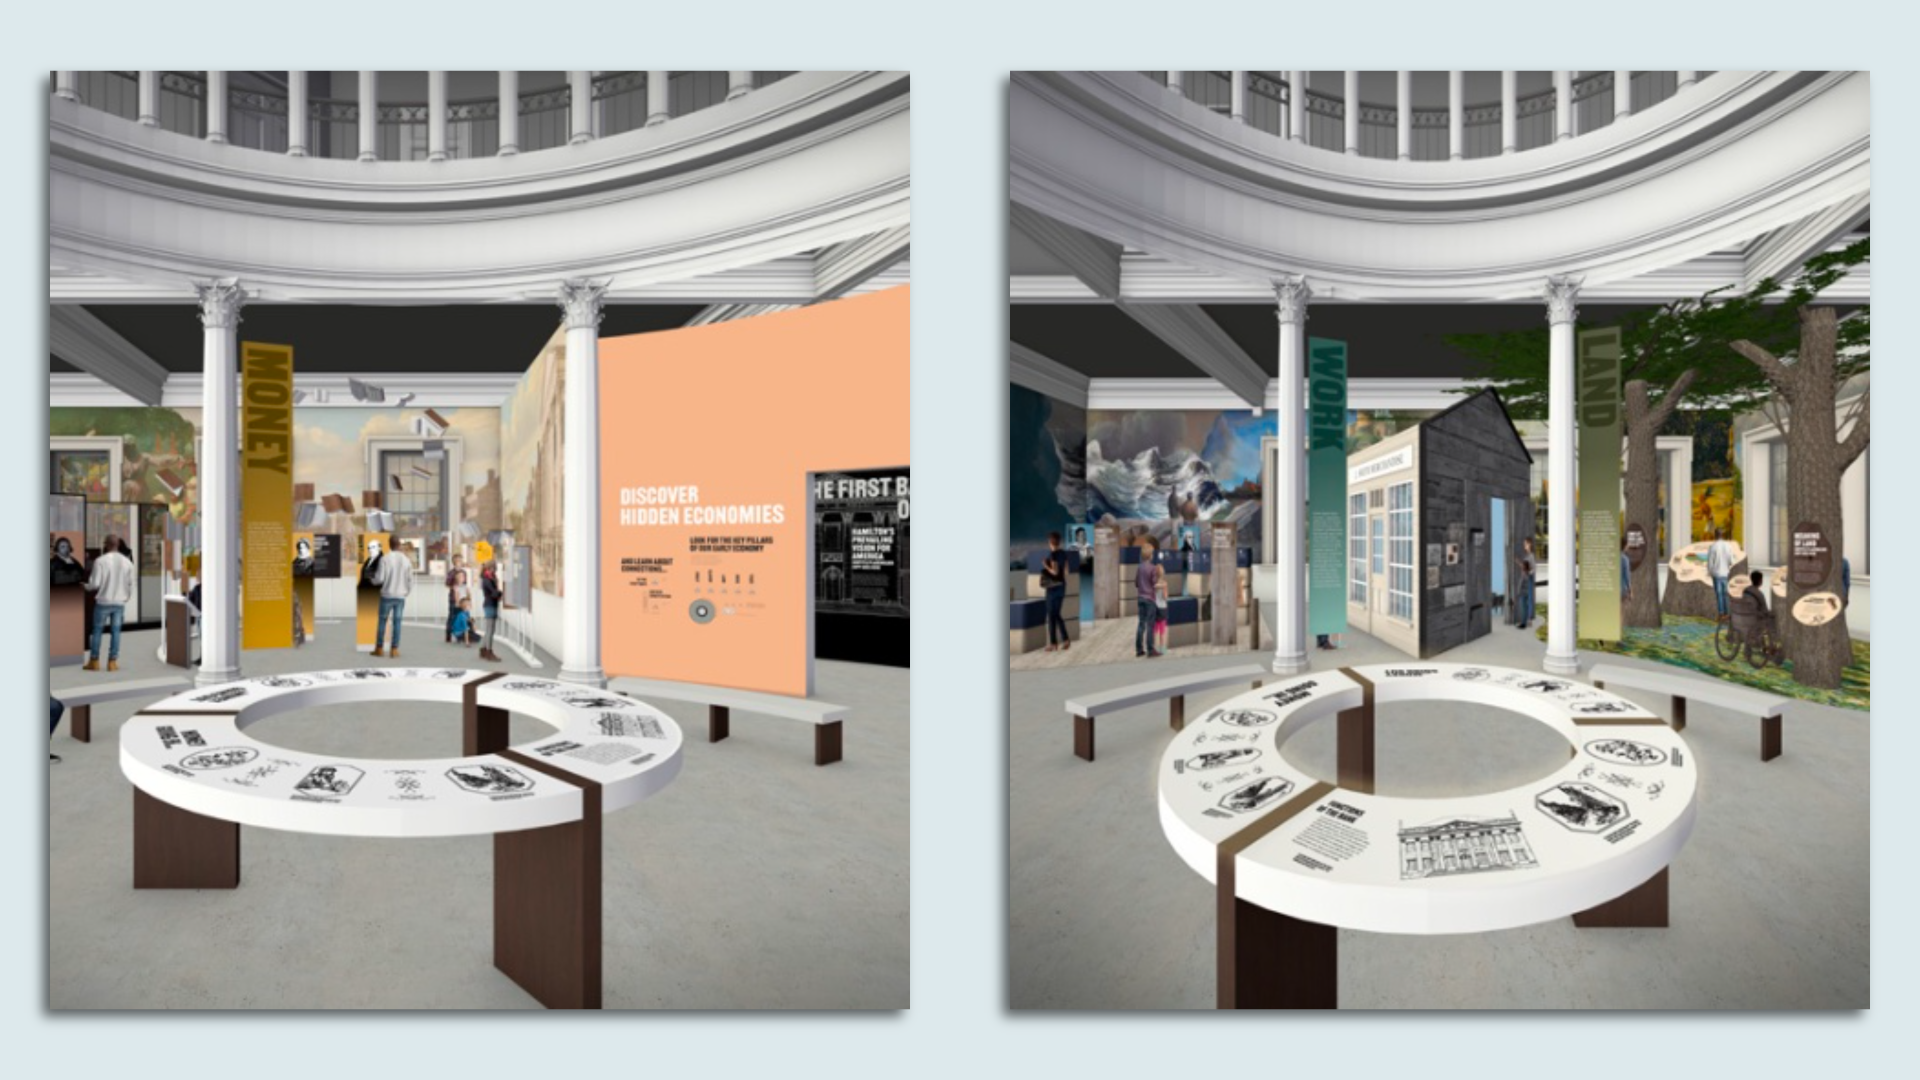 Renderings of the newly proposed museum inside the First Bank of the U.S.